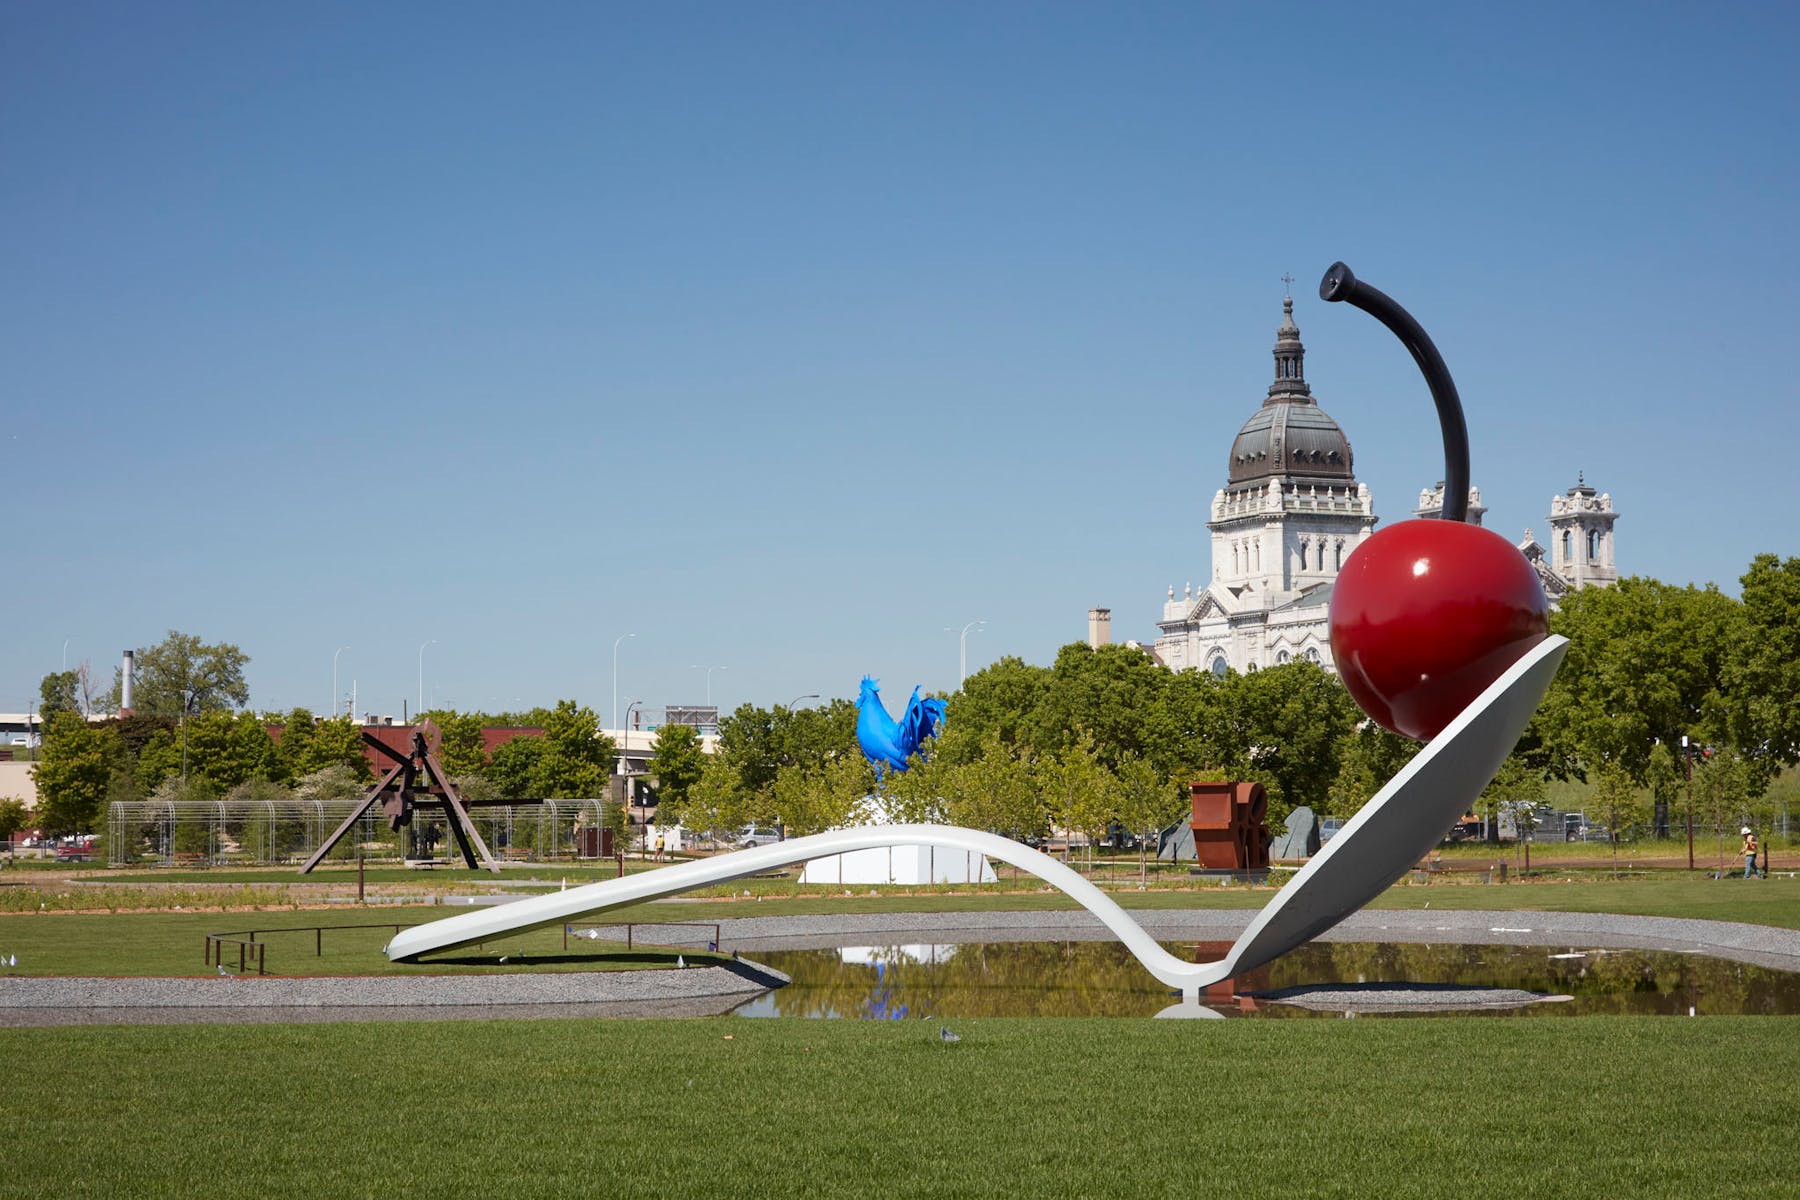 giant sculpture of cherry on a spoon